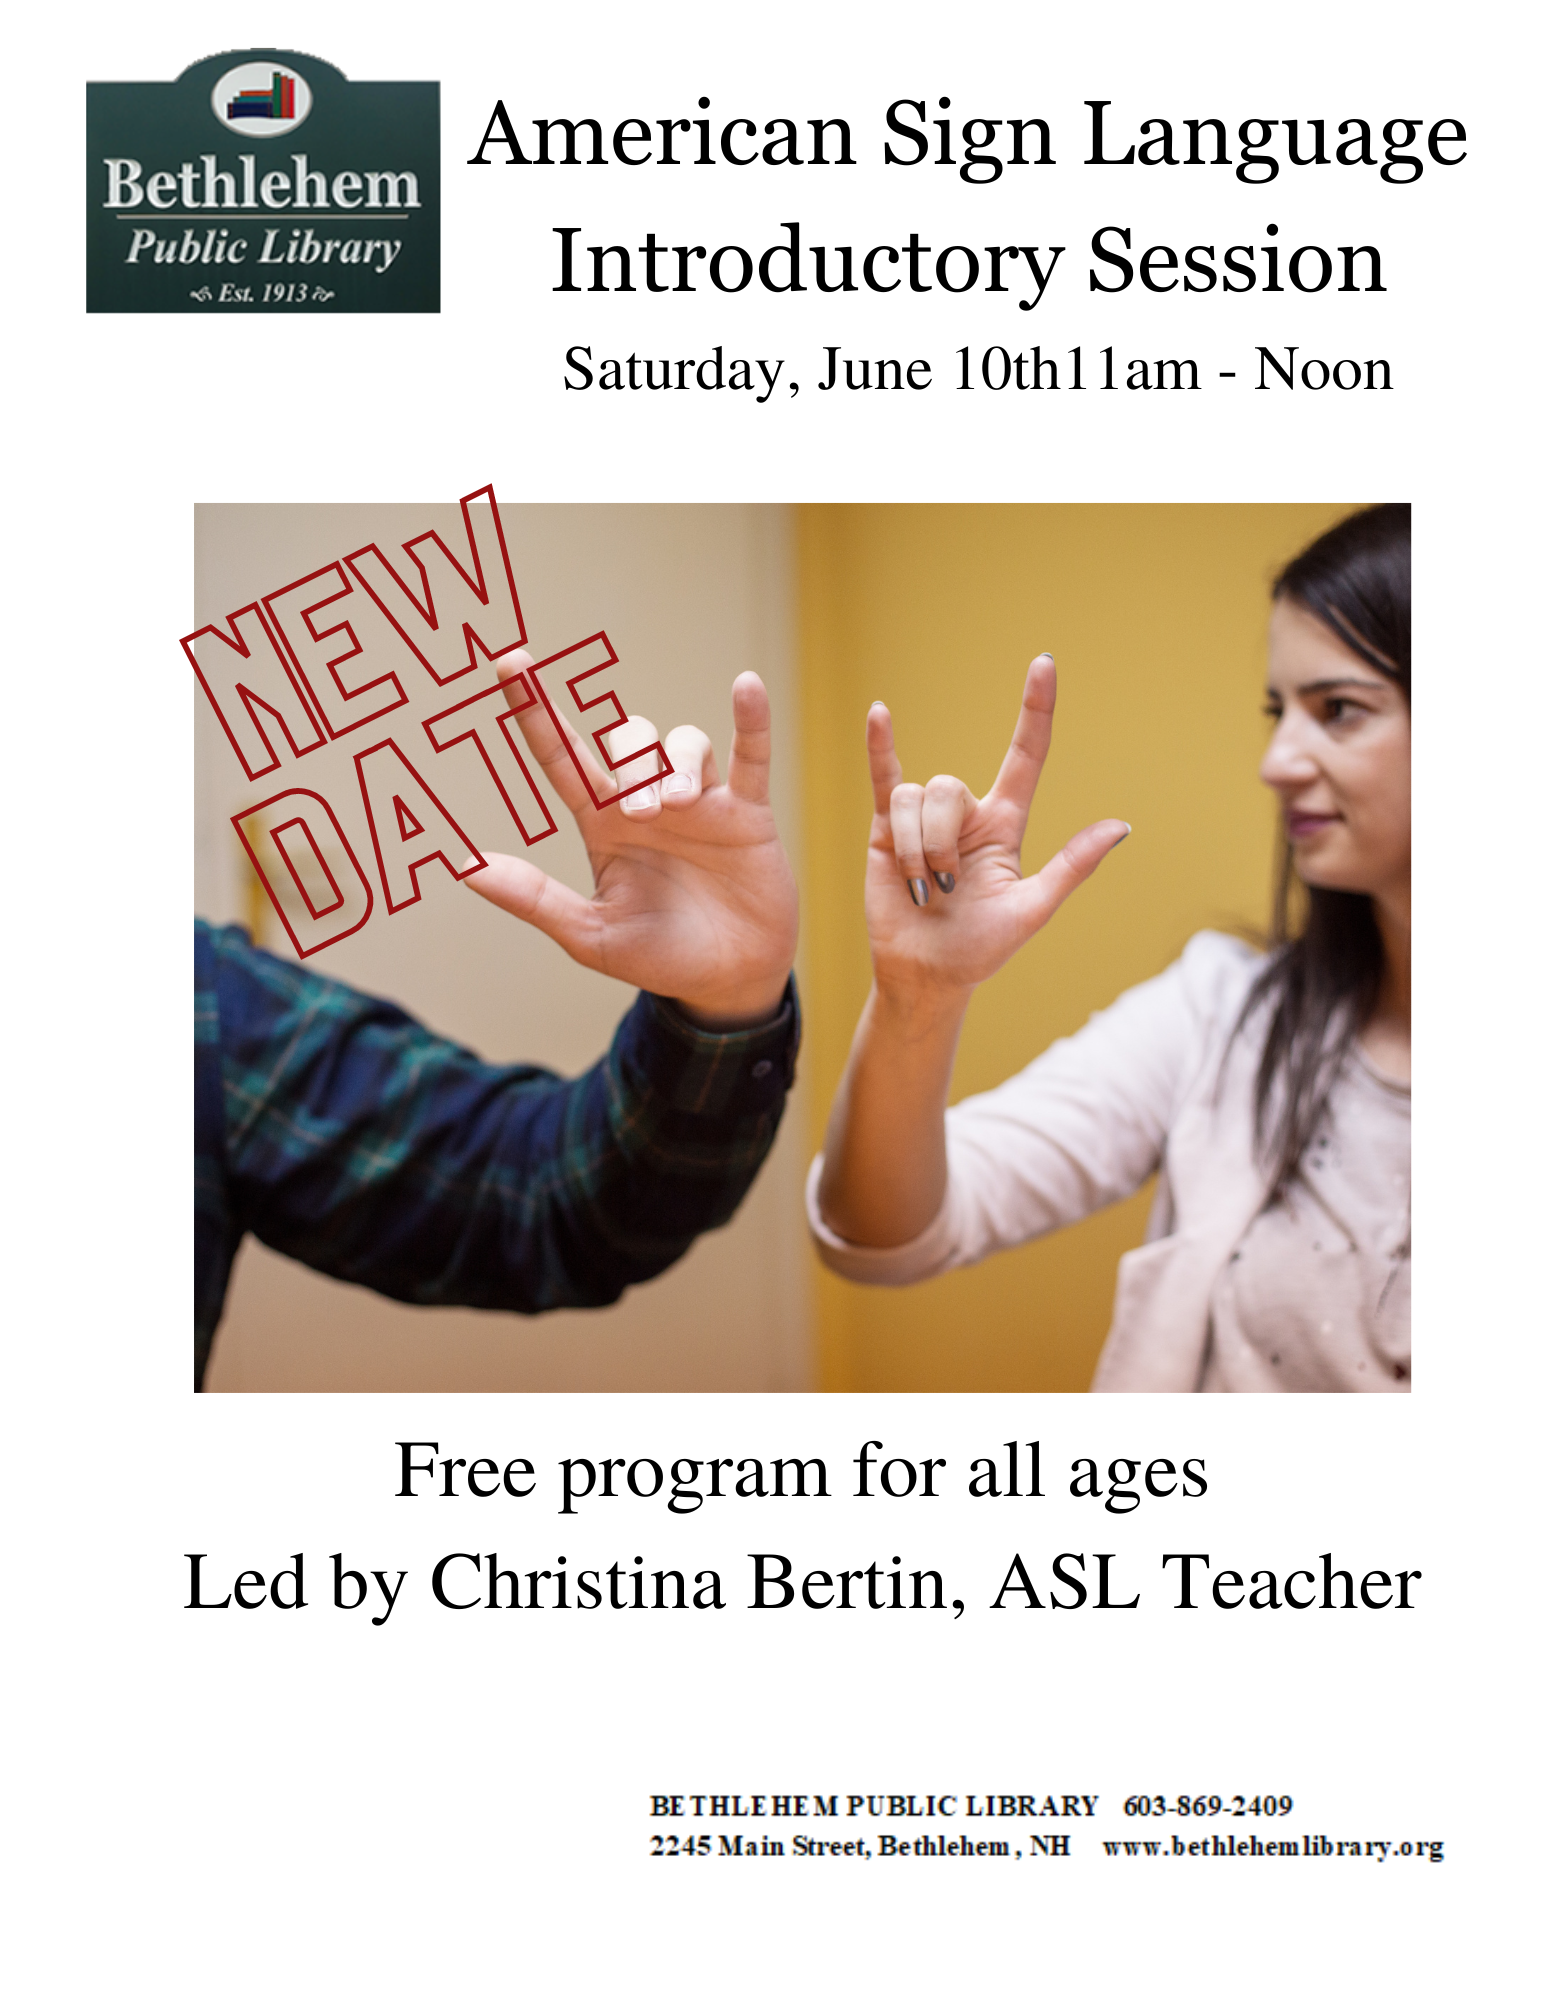 Learn American Sign Language Saturday, June 10th 11am Christina Bertin teaches this introductory session for all ages and abilities!  